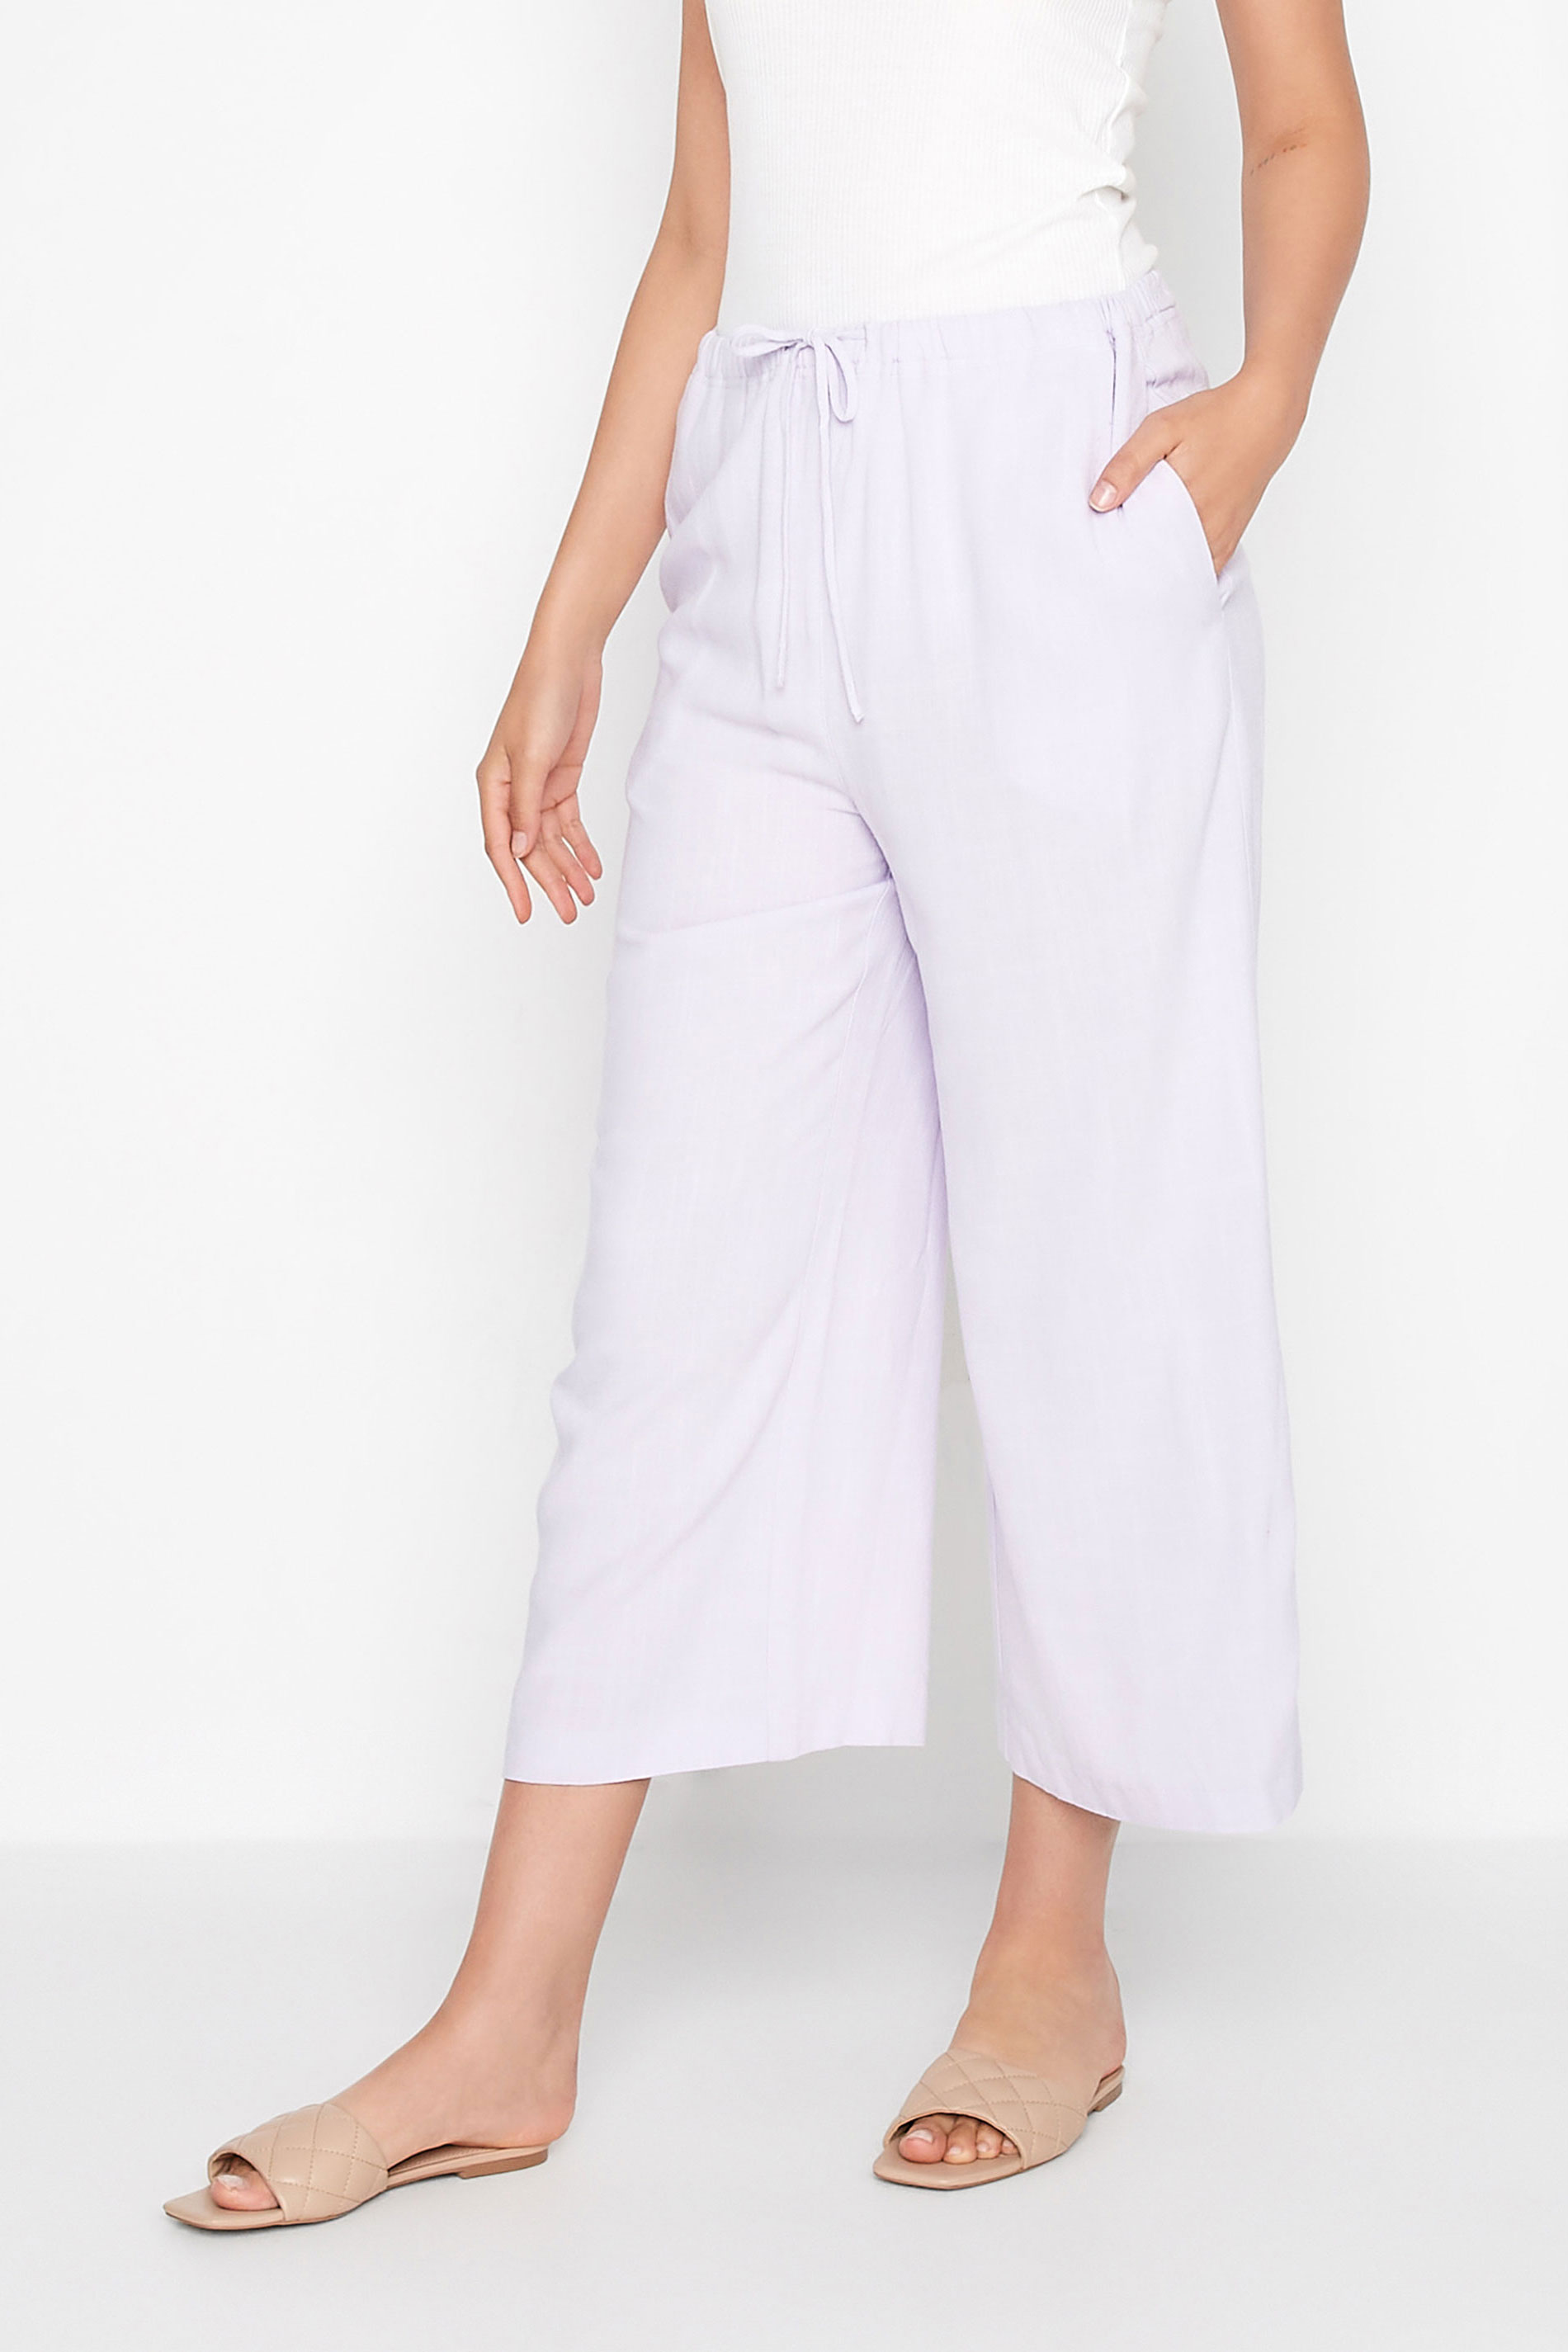 LTS Tall Women's Lilac Purple Linen Look Cropped Trousers | Long Tall Sally  1